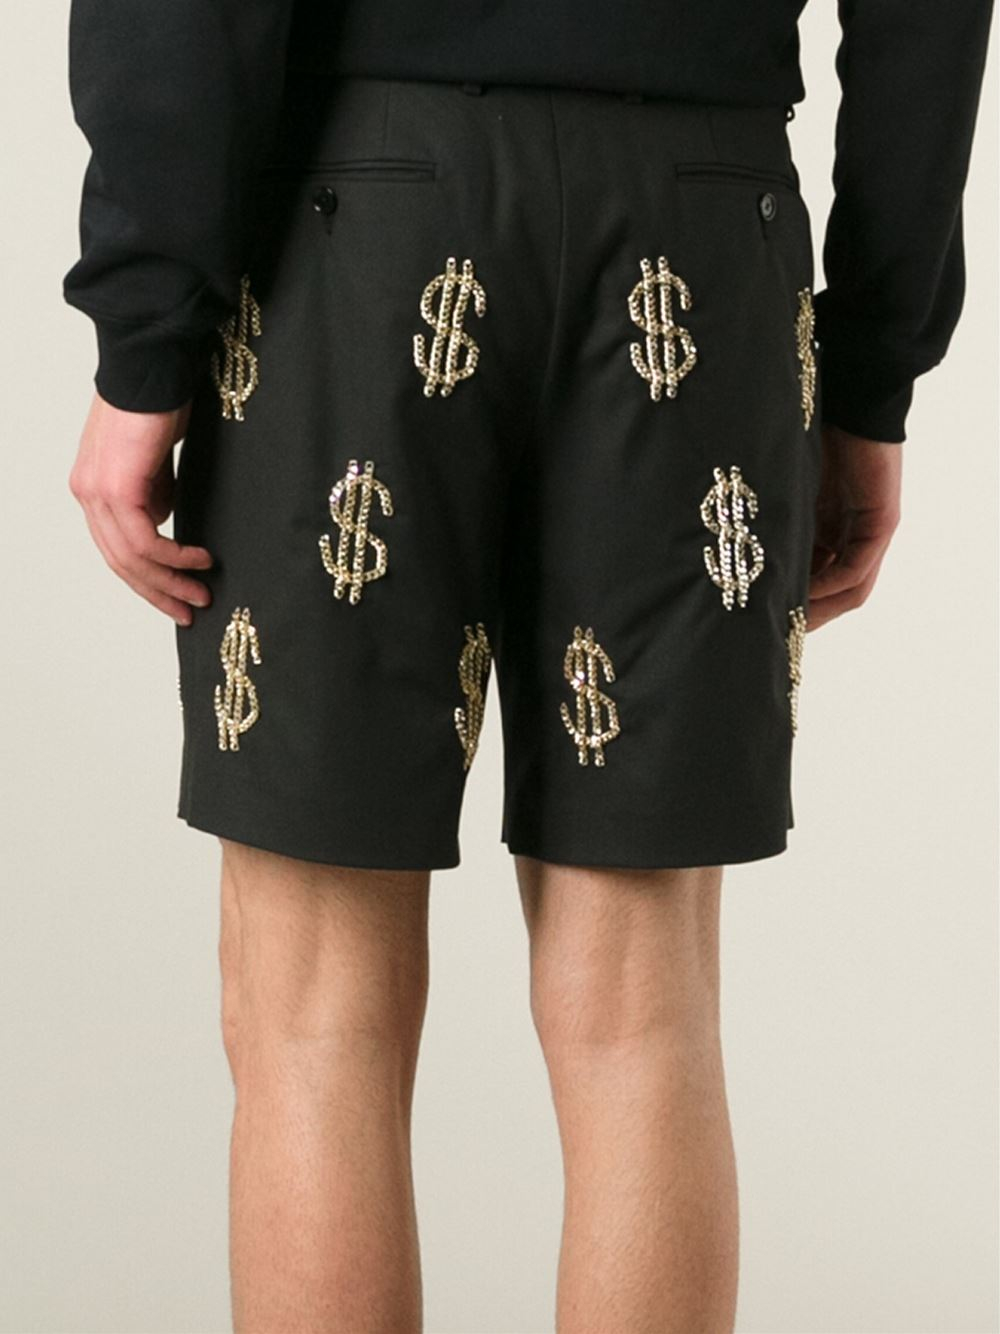 Moschino Chain Dollar Sign Shorts in Black for Men - Lyst